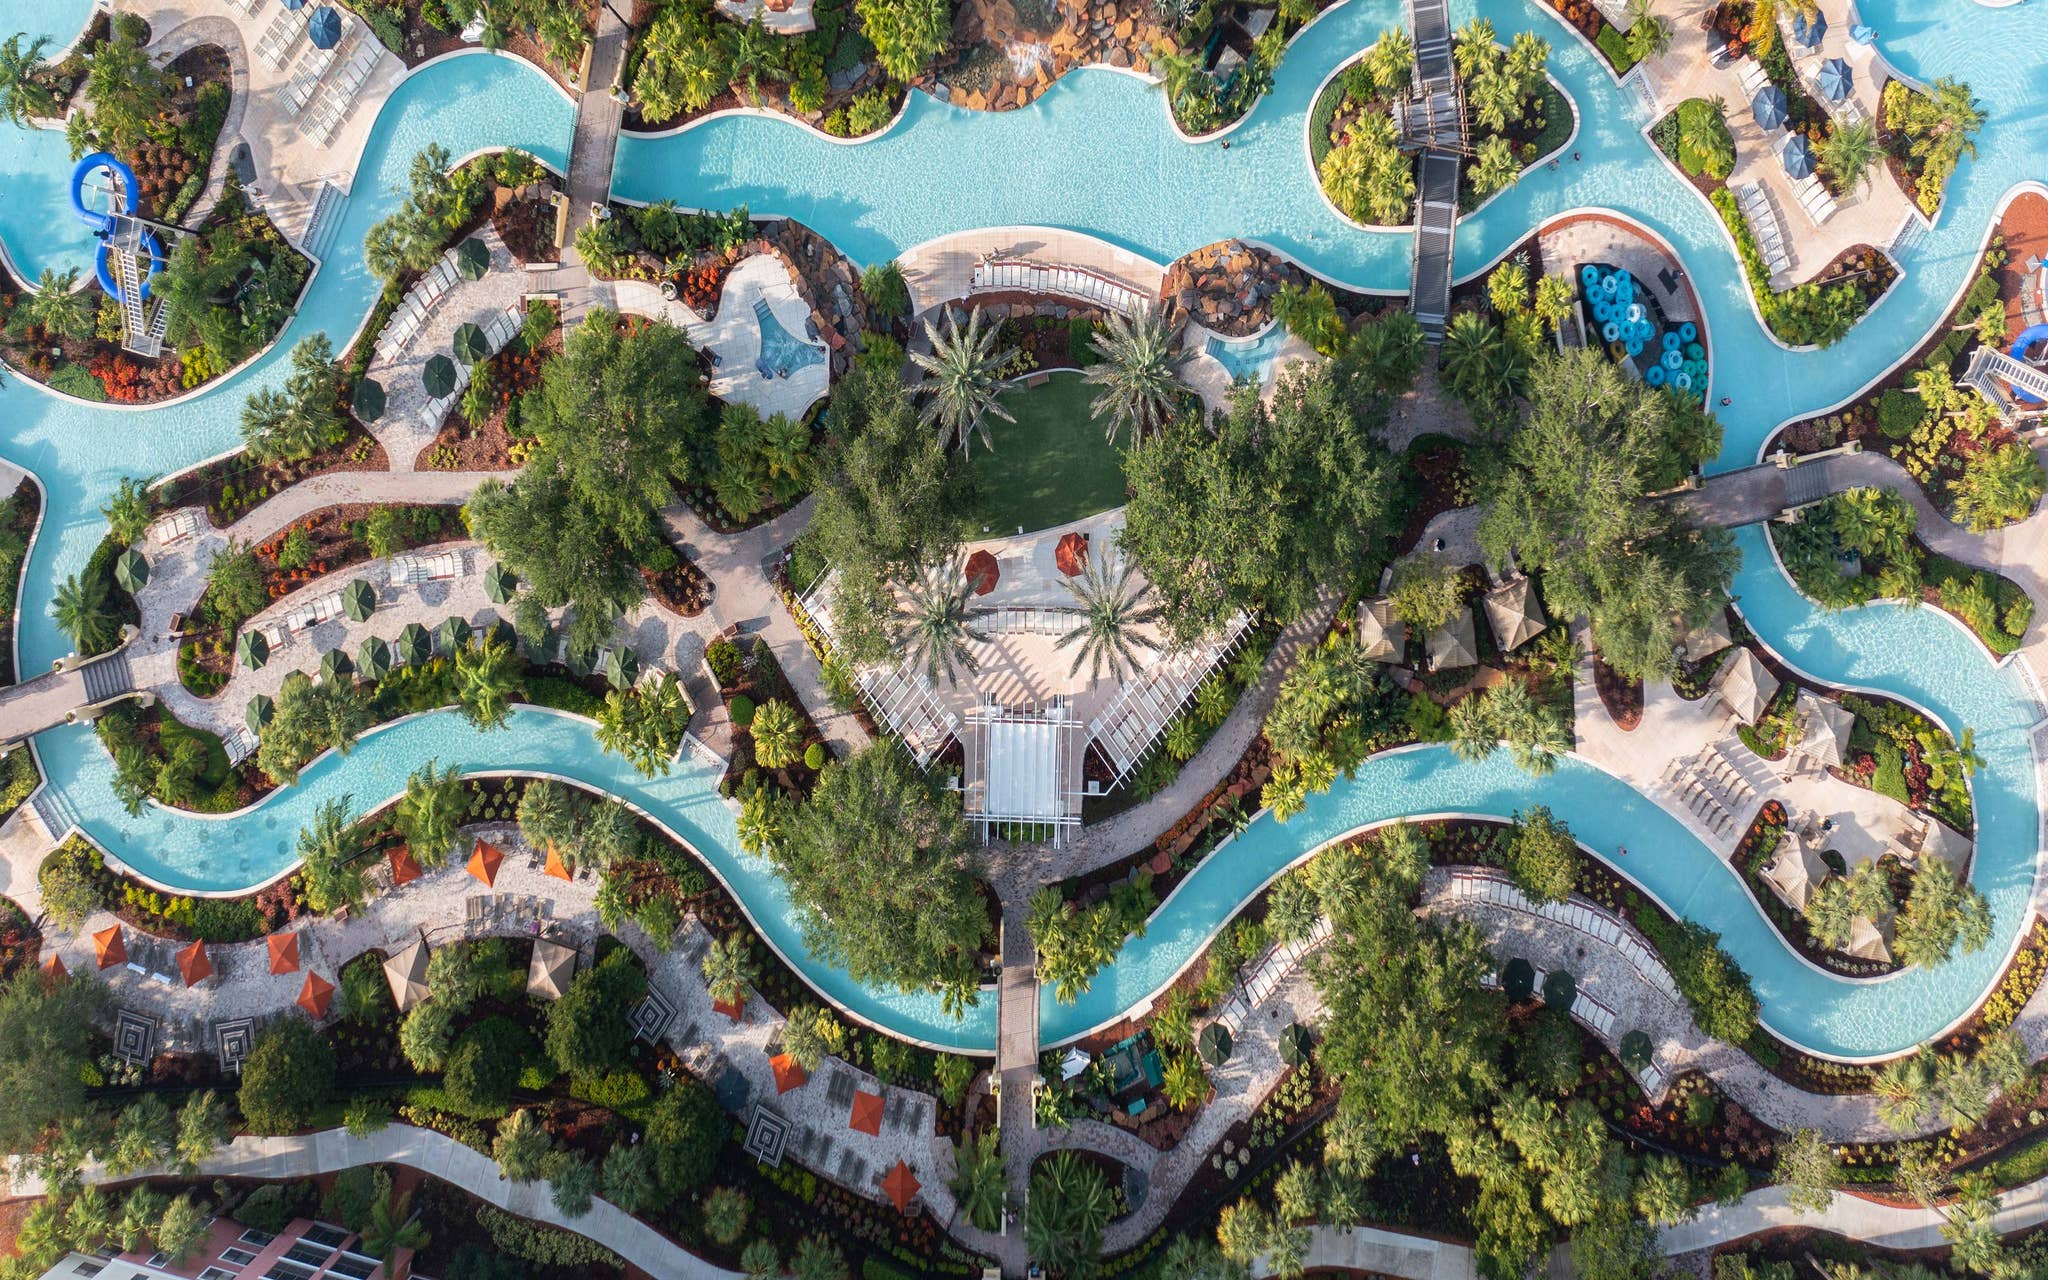 Orange Lake Resort Aerial View Of Lazy River Hero 4320x2048 ?format=pjpg&auto=webp&disable=upscale&quality=70&width=2048&height=1280&fit=crop